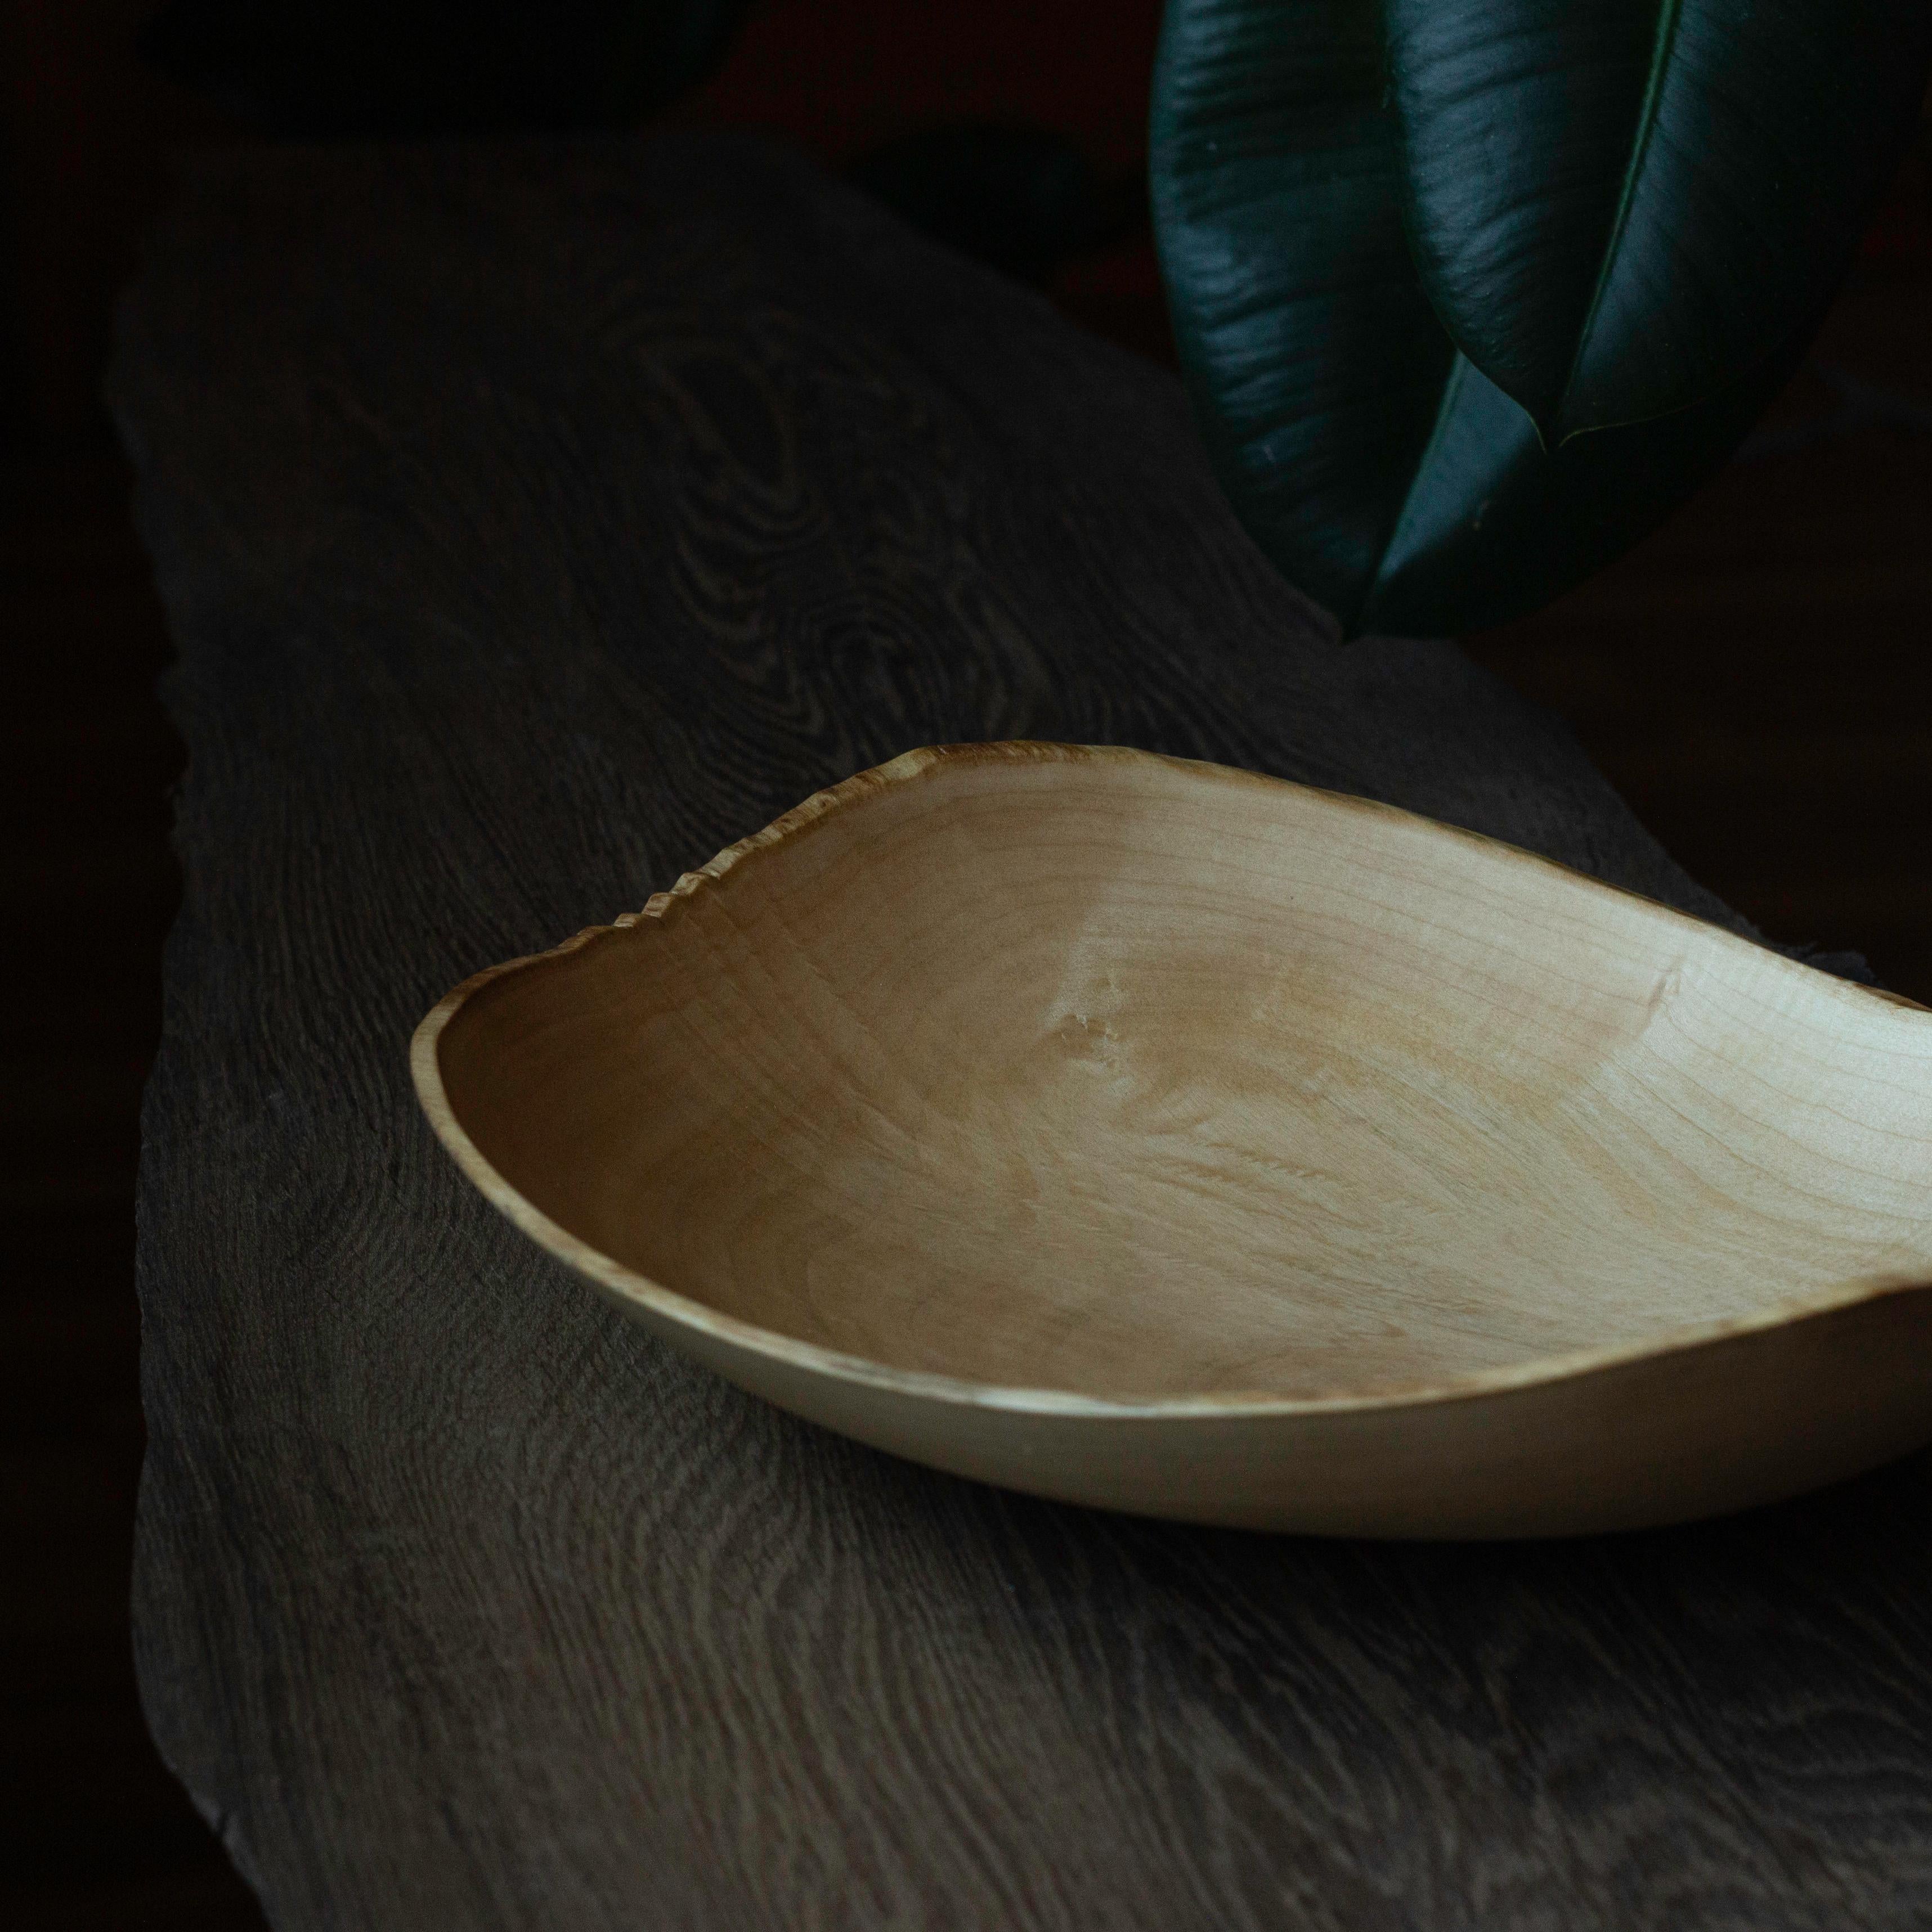 Russian Sycamore Maple Bowl by Vlad Droz